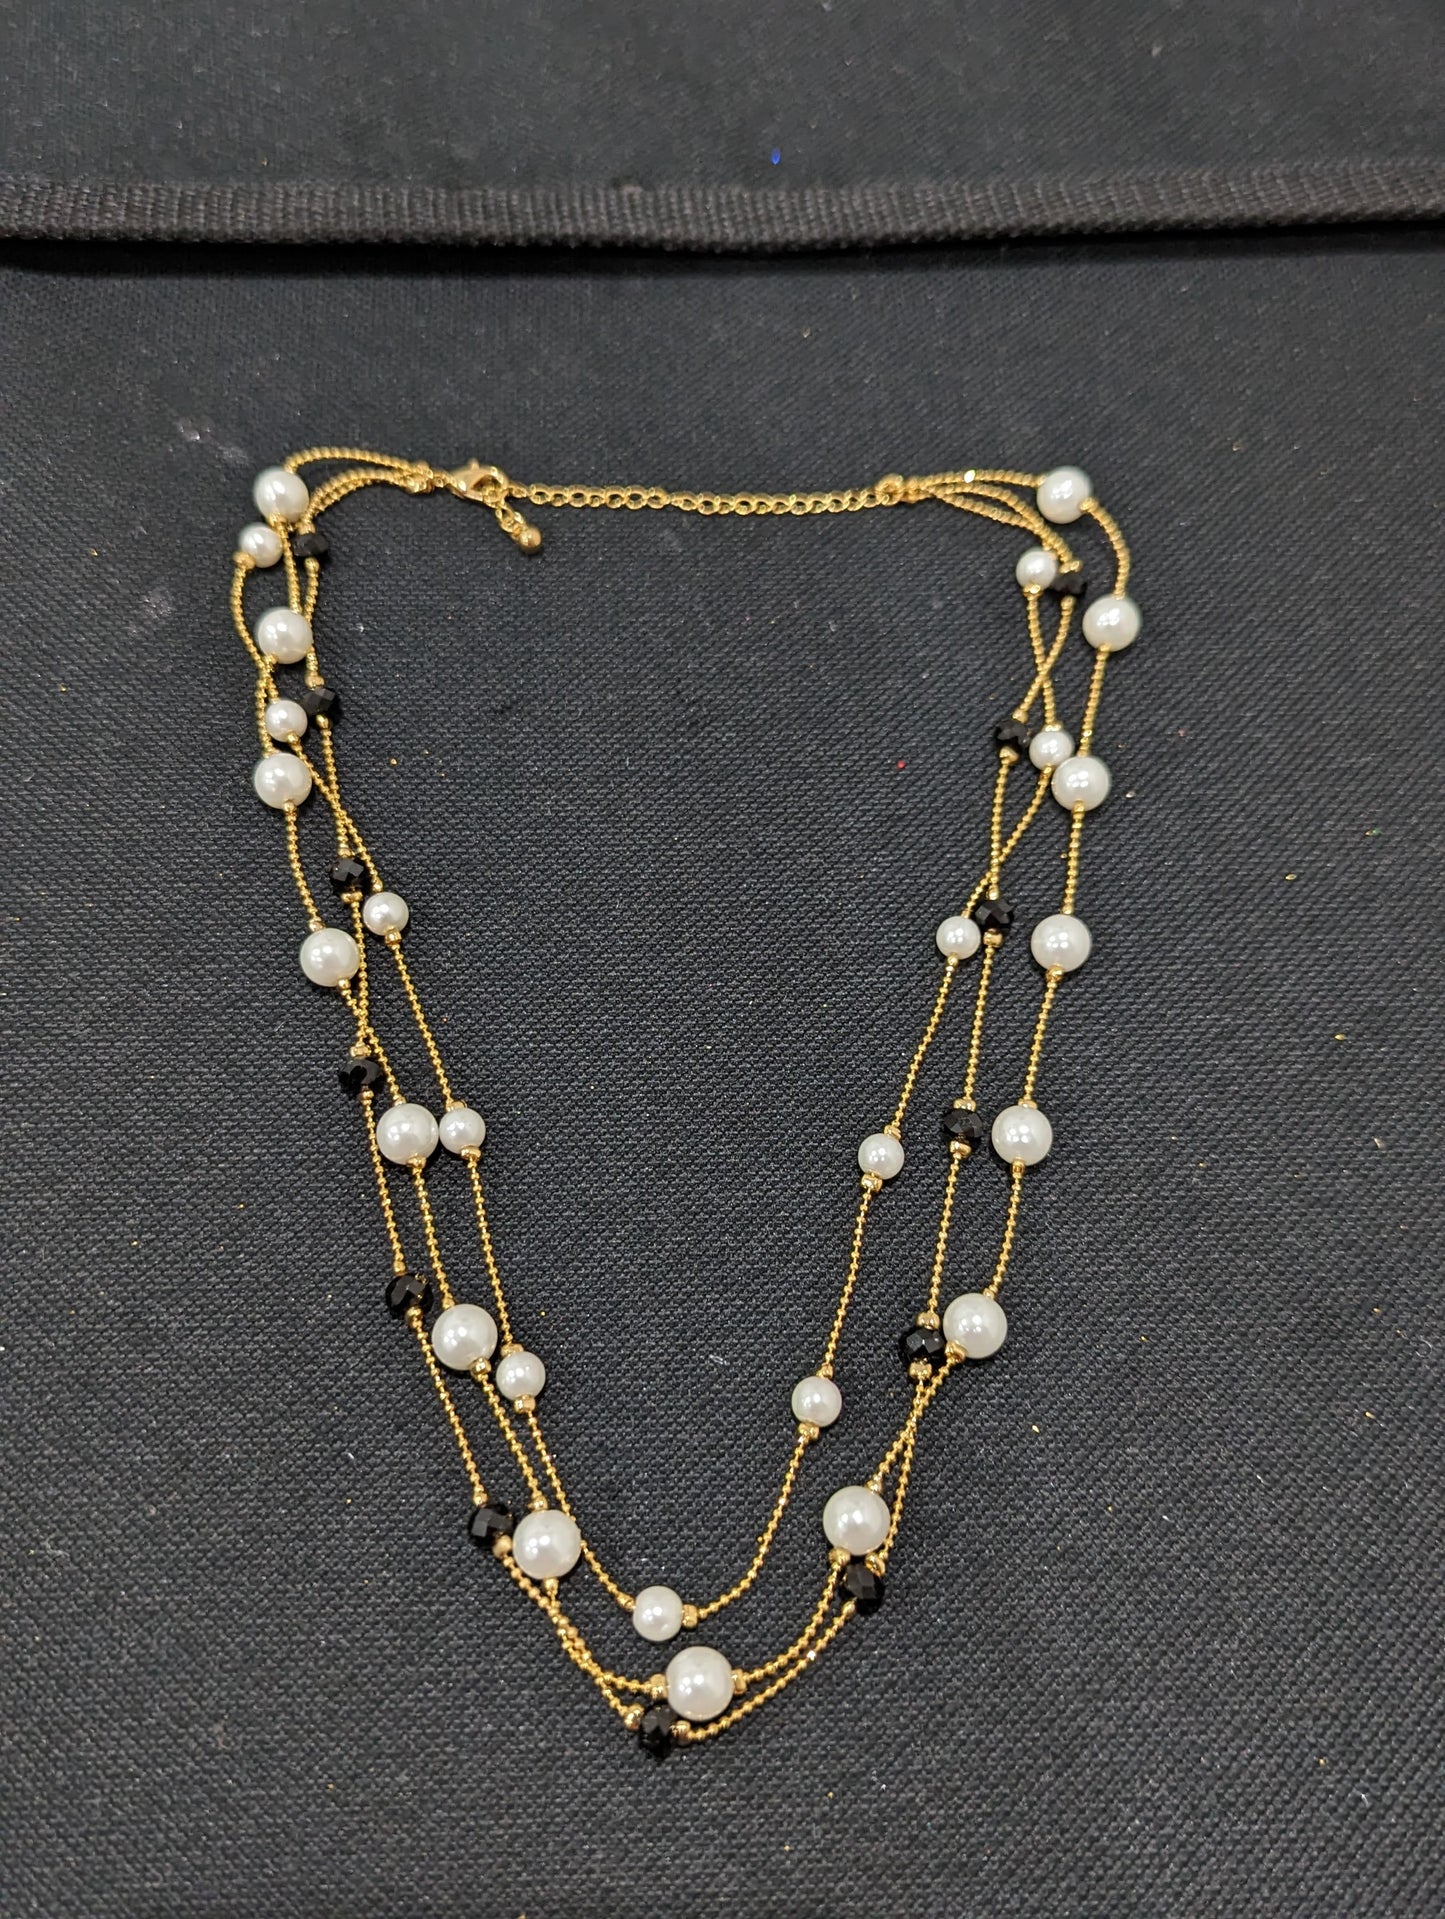 Triple stranded pearl and black bead necklace